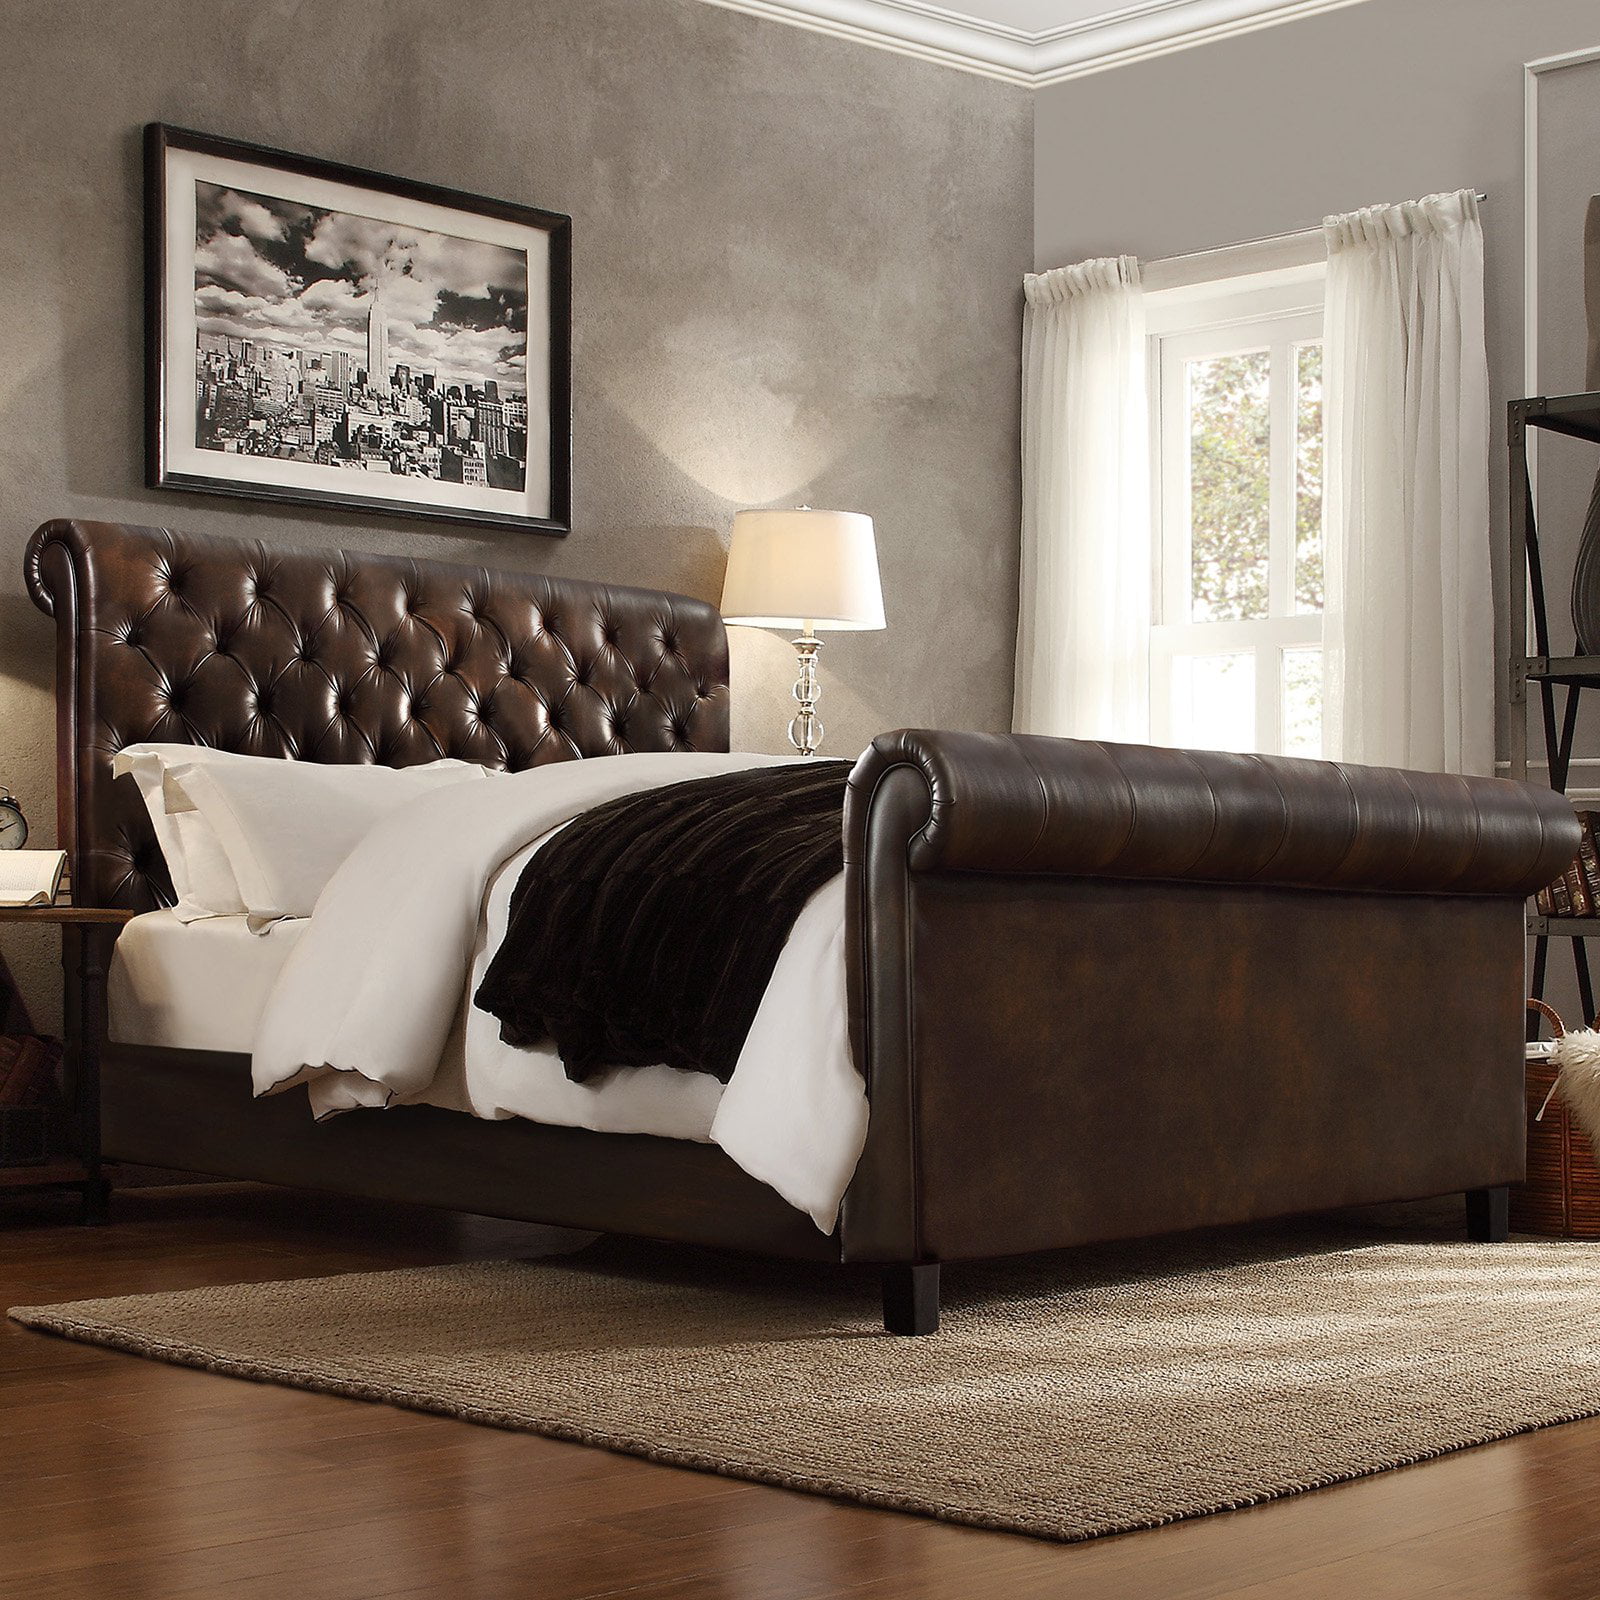 Weston Home Dartford Upholstered Faux, Brown Leather Sleigh Bed King Size